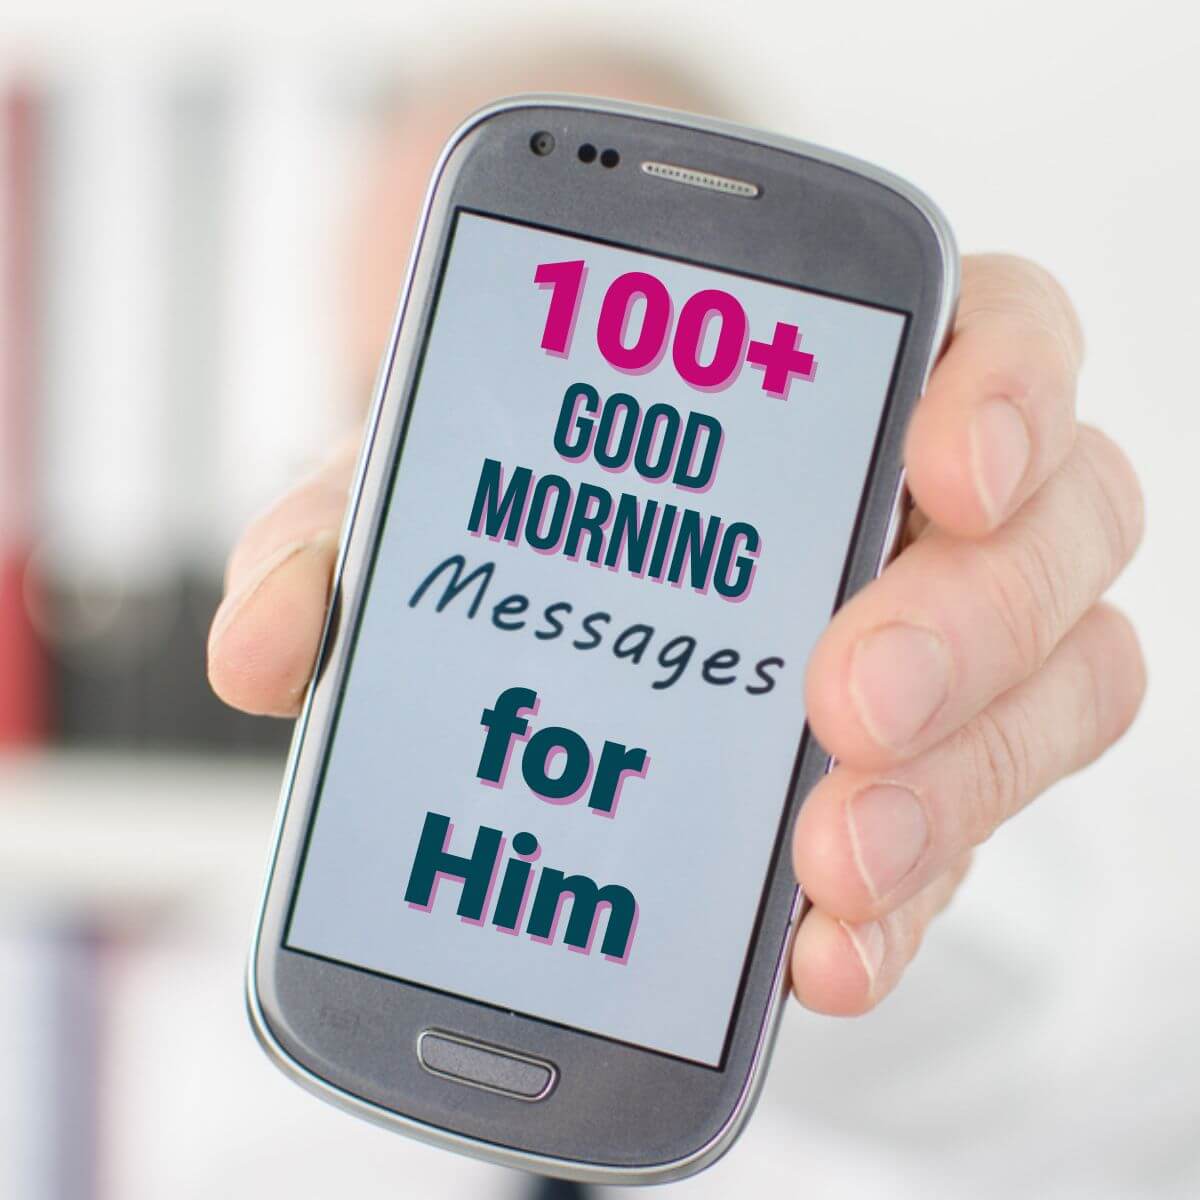 150 Good Morning Messages for Him to Start the Day Right